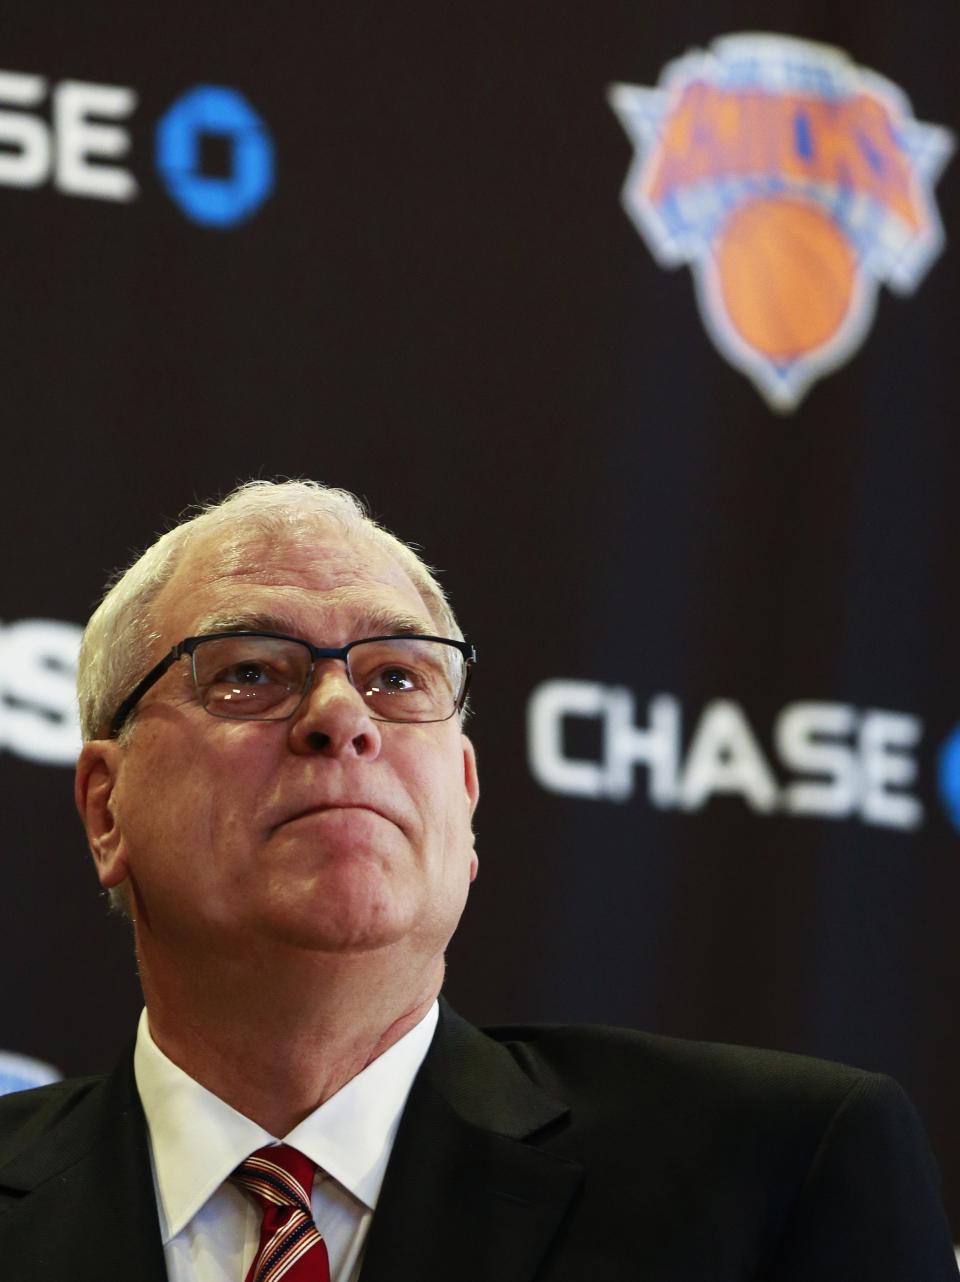 Jackson looks on during a news conference announcing him as the team president of the New York Knicks basketball team at Madison Square Garden in New York